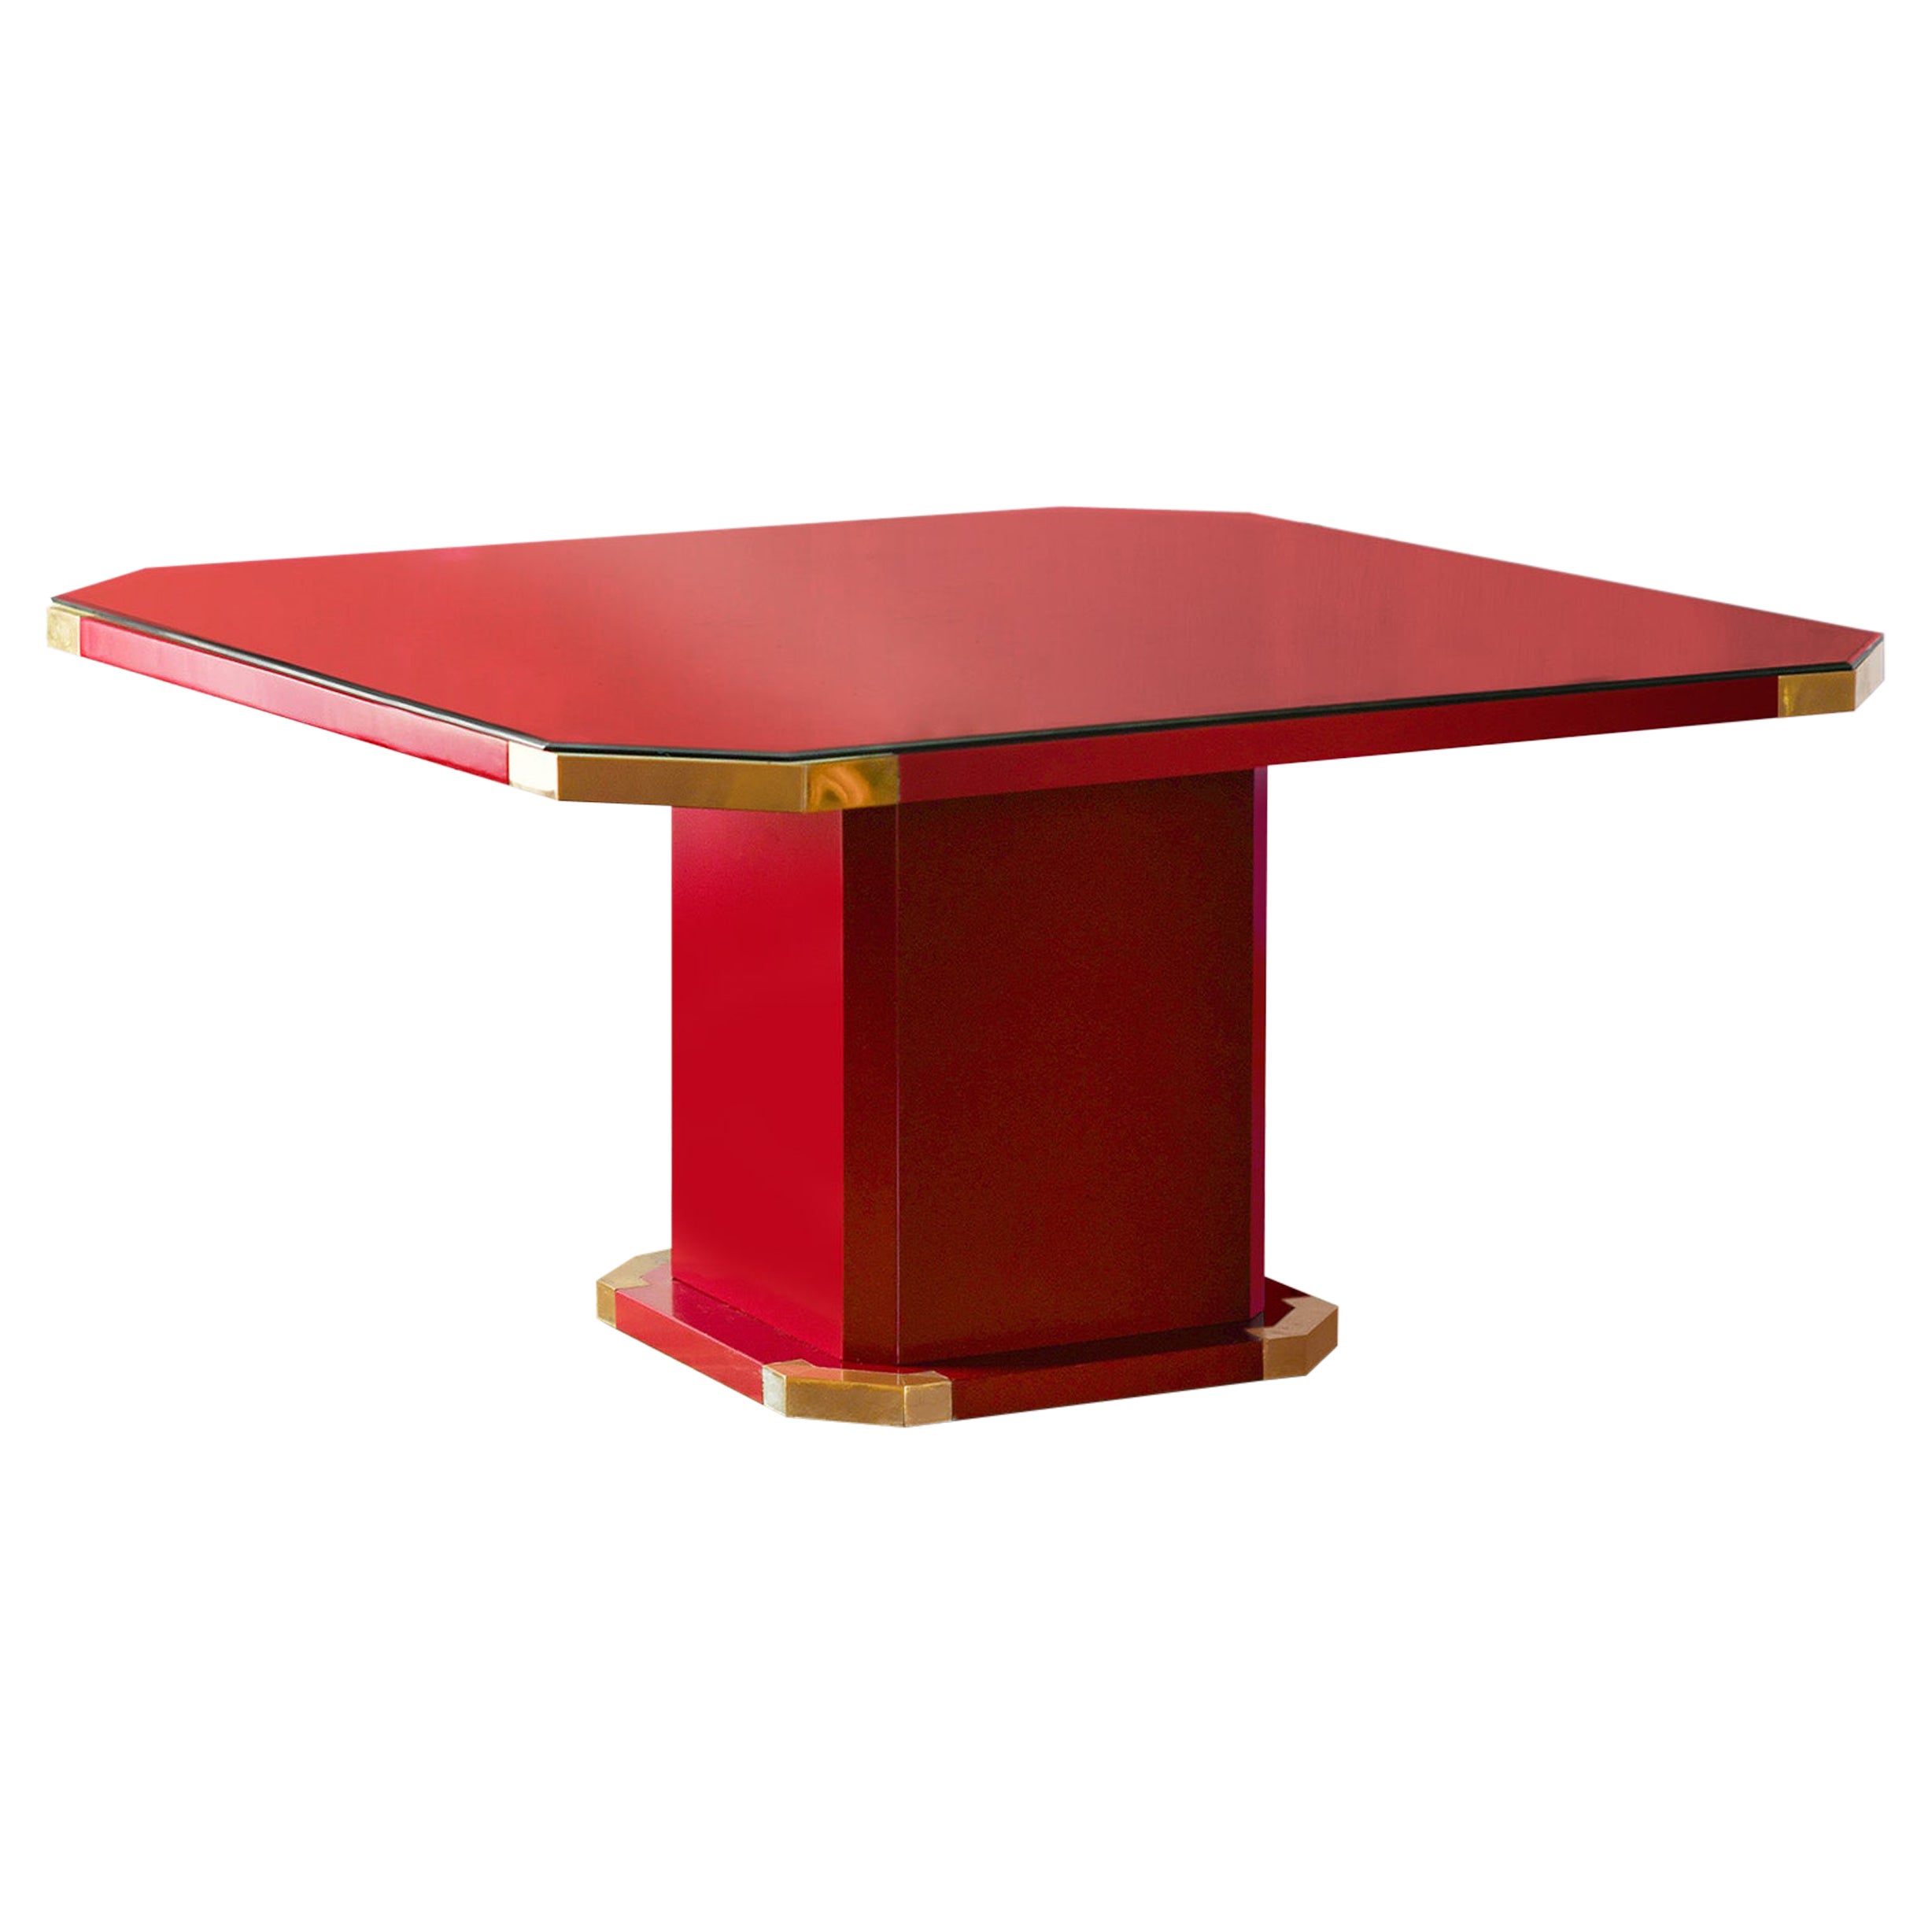 China red lacquered hexagonal table with brass details and cut crystal shelf For Sale